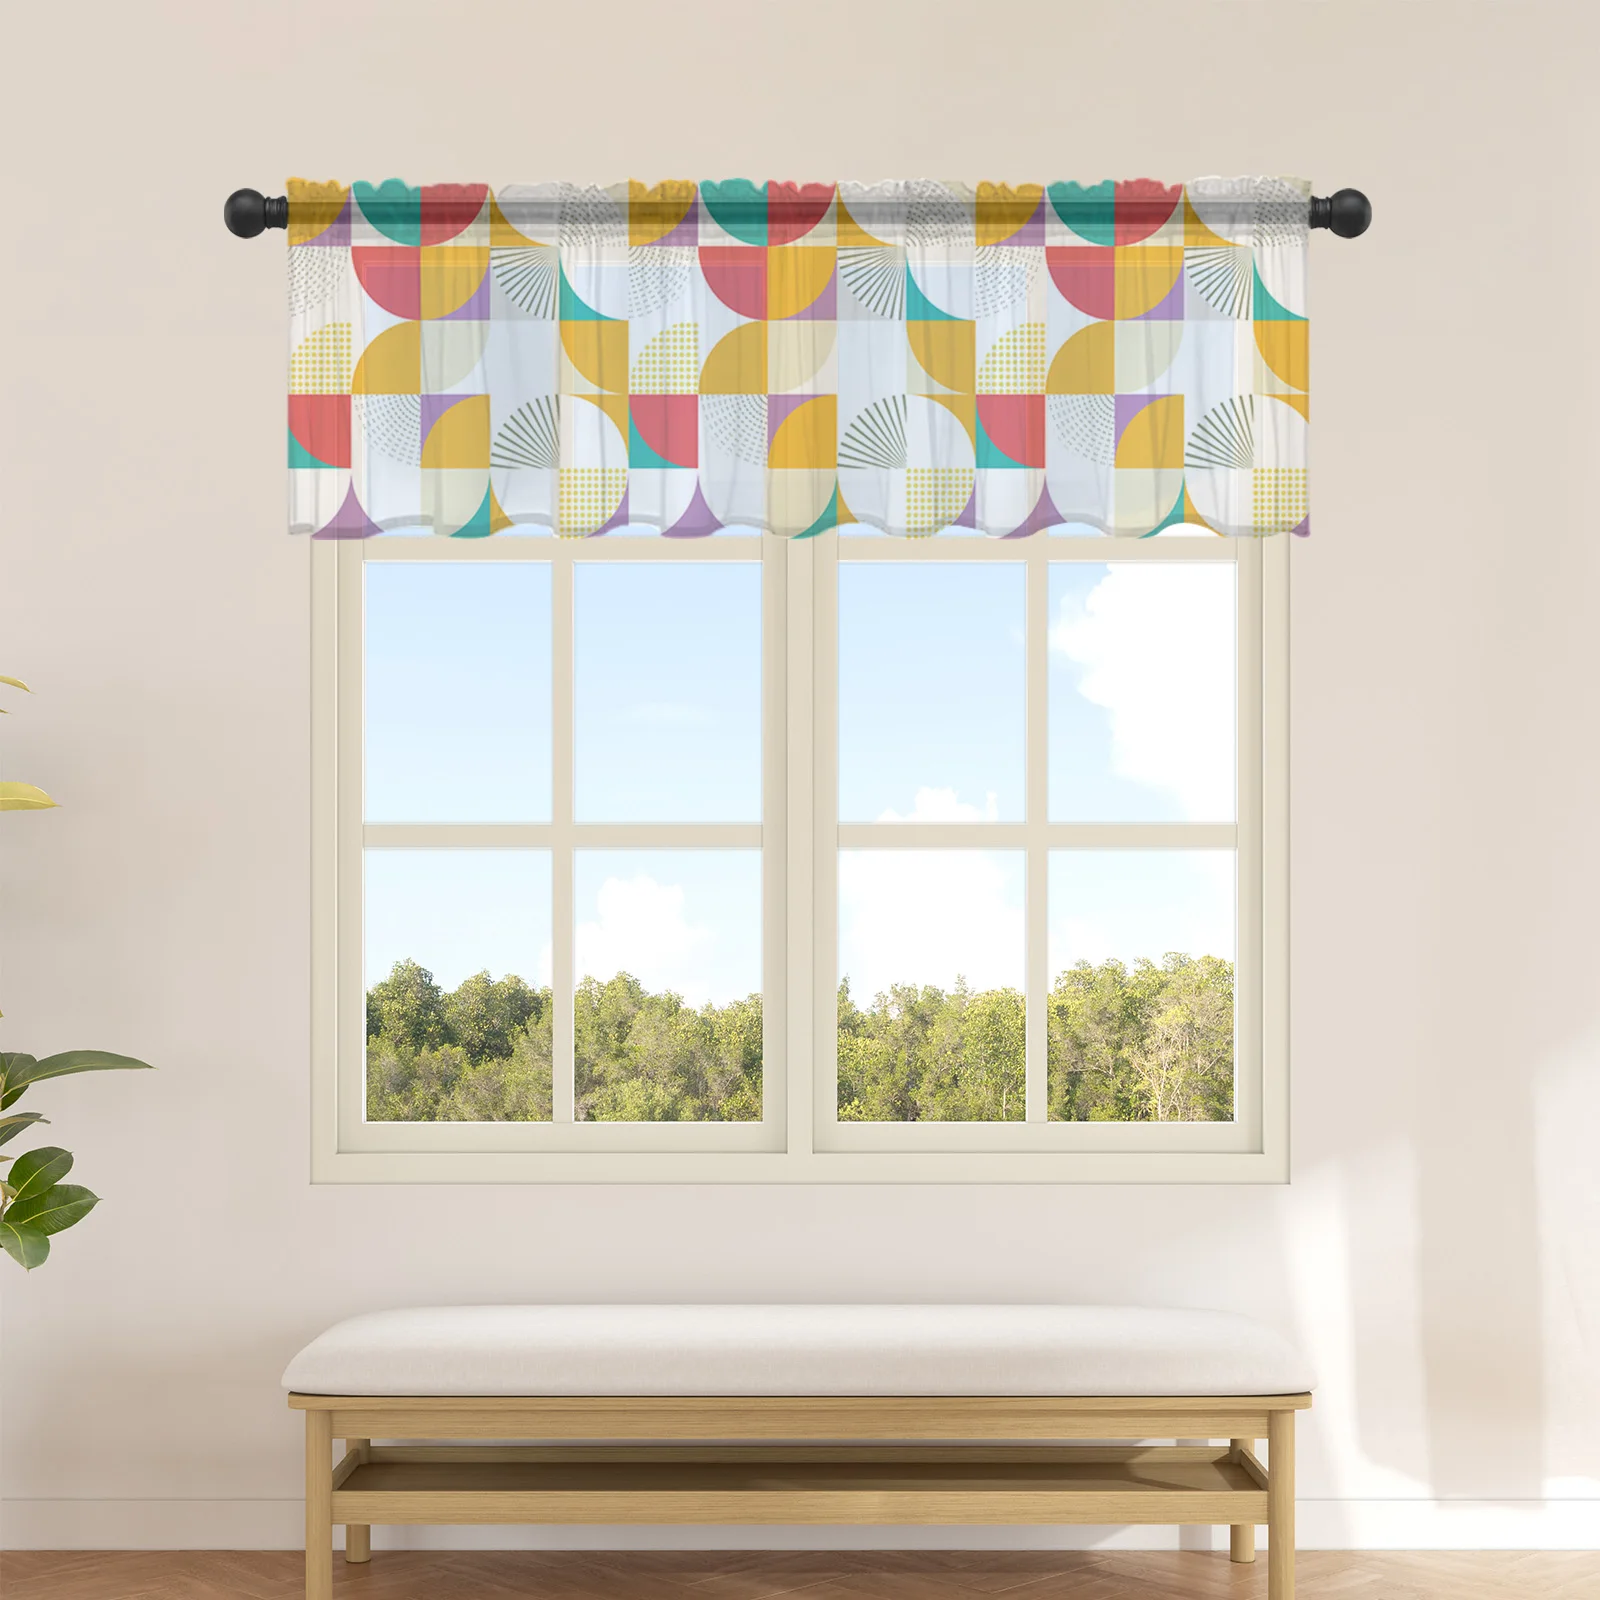 

Medieval Multicolored Geometry Short Tulle Curtain Half-Curtain for Kitchen Door Drape Cafe Small Window Sheer Curtains